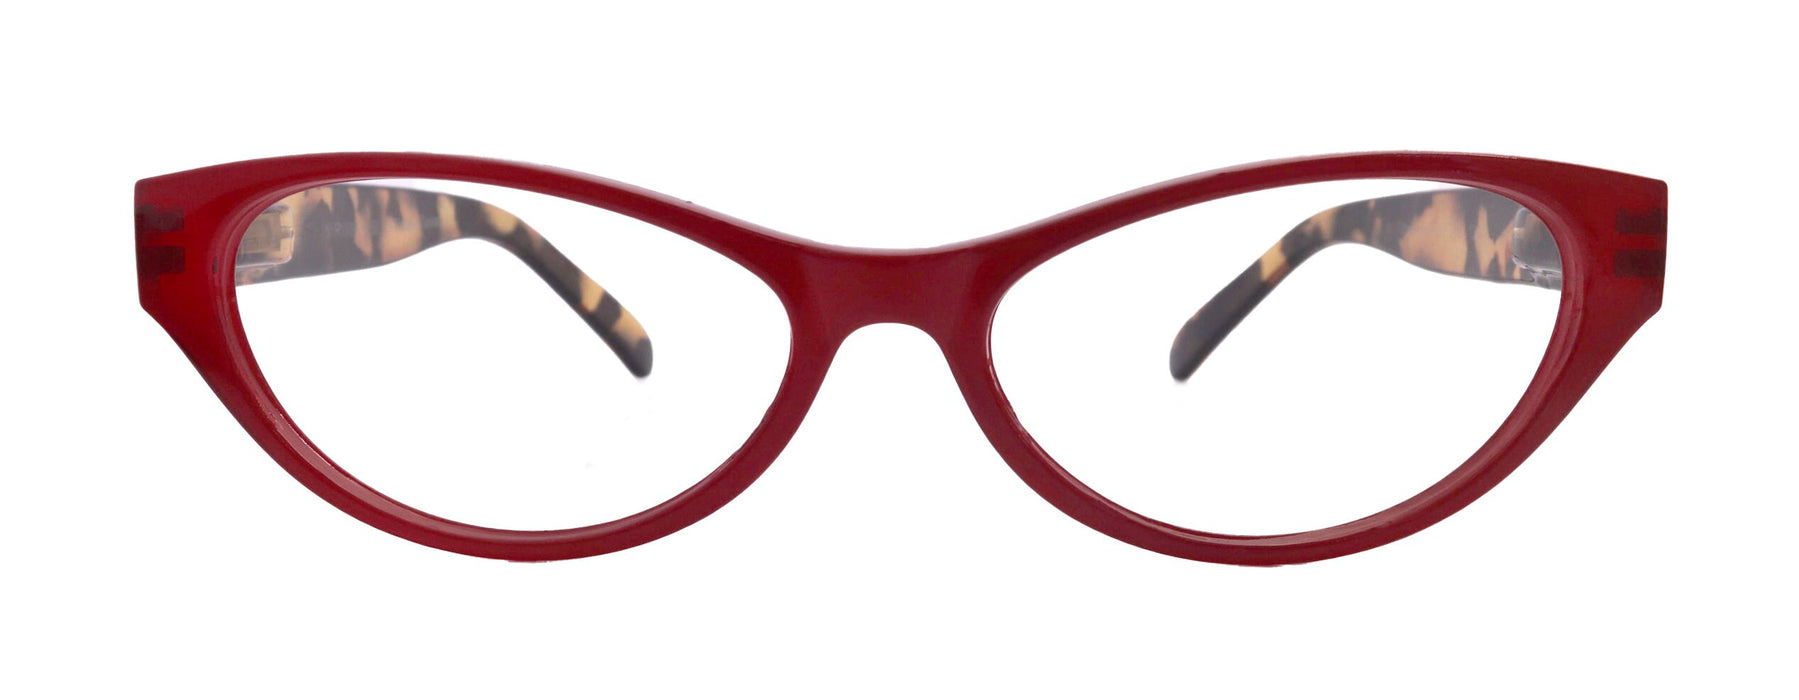 Zoe, Premium Reading Glasses High End Reading Glass +1.50 to +3 (Cat Eye) (Red) Magnifying glasses, optical Frames, NY Fifth Avenue